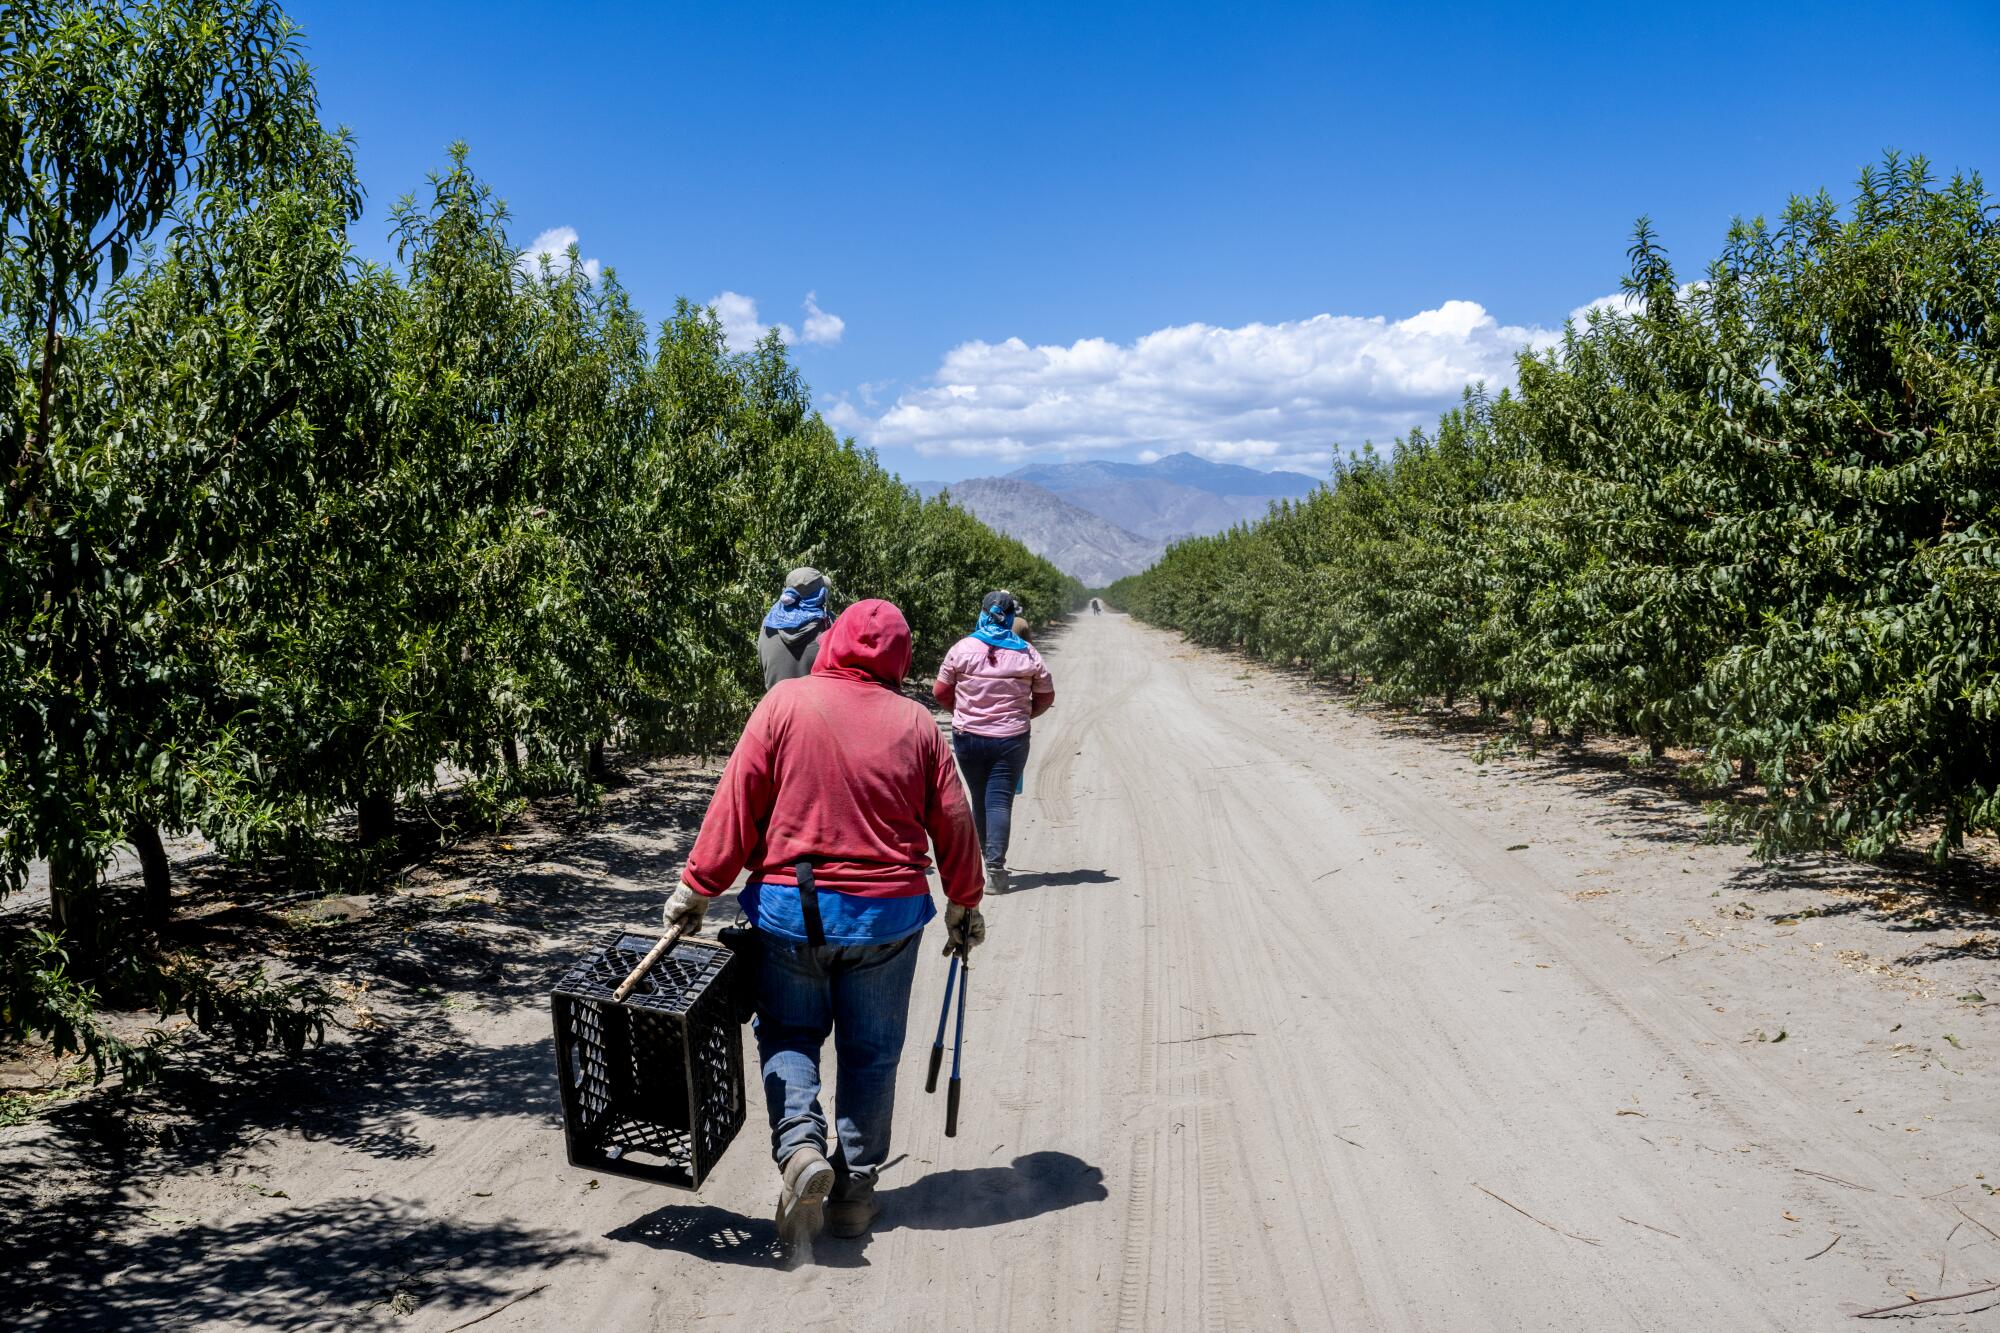 Farmworkers walk along a row of trees on a dirt road